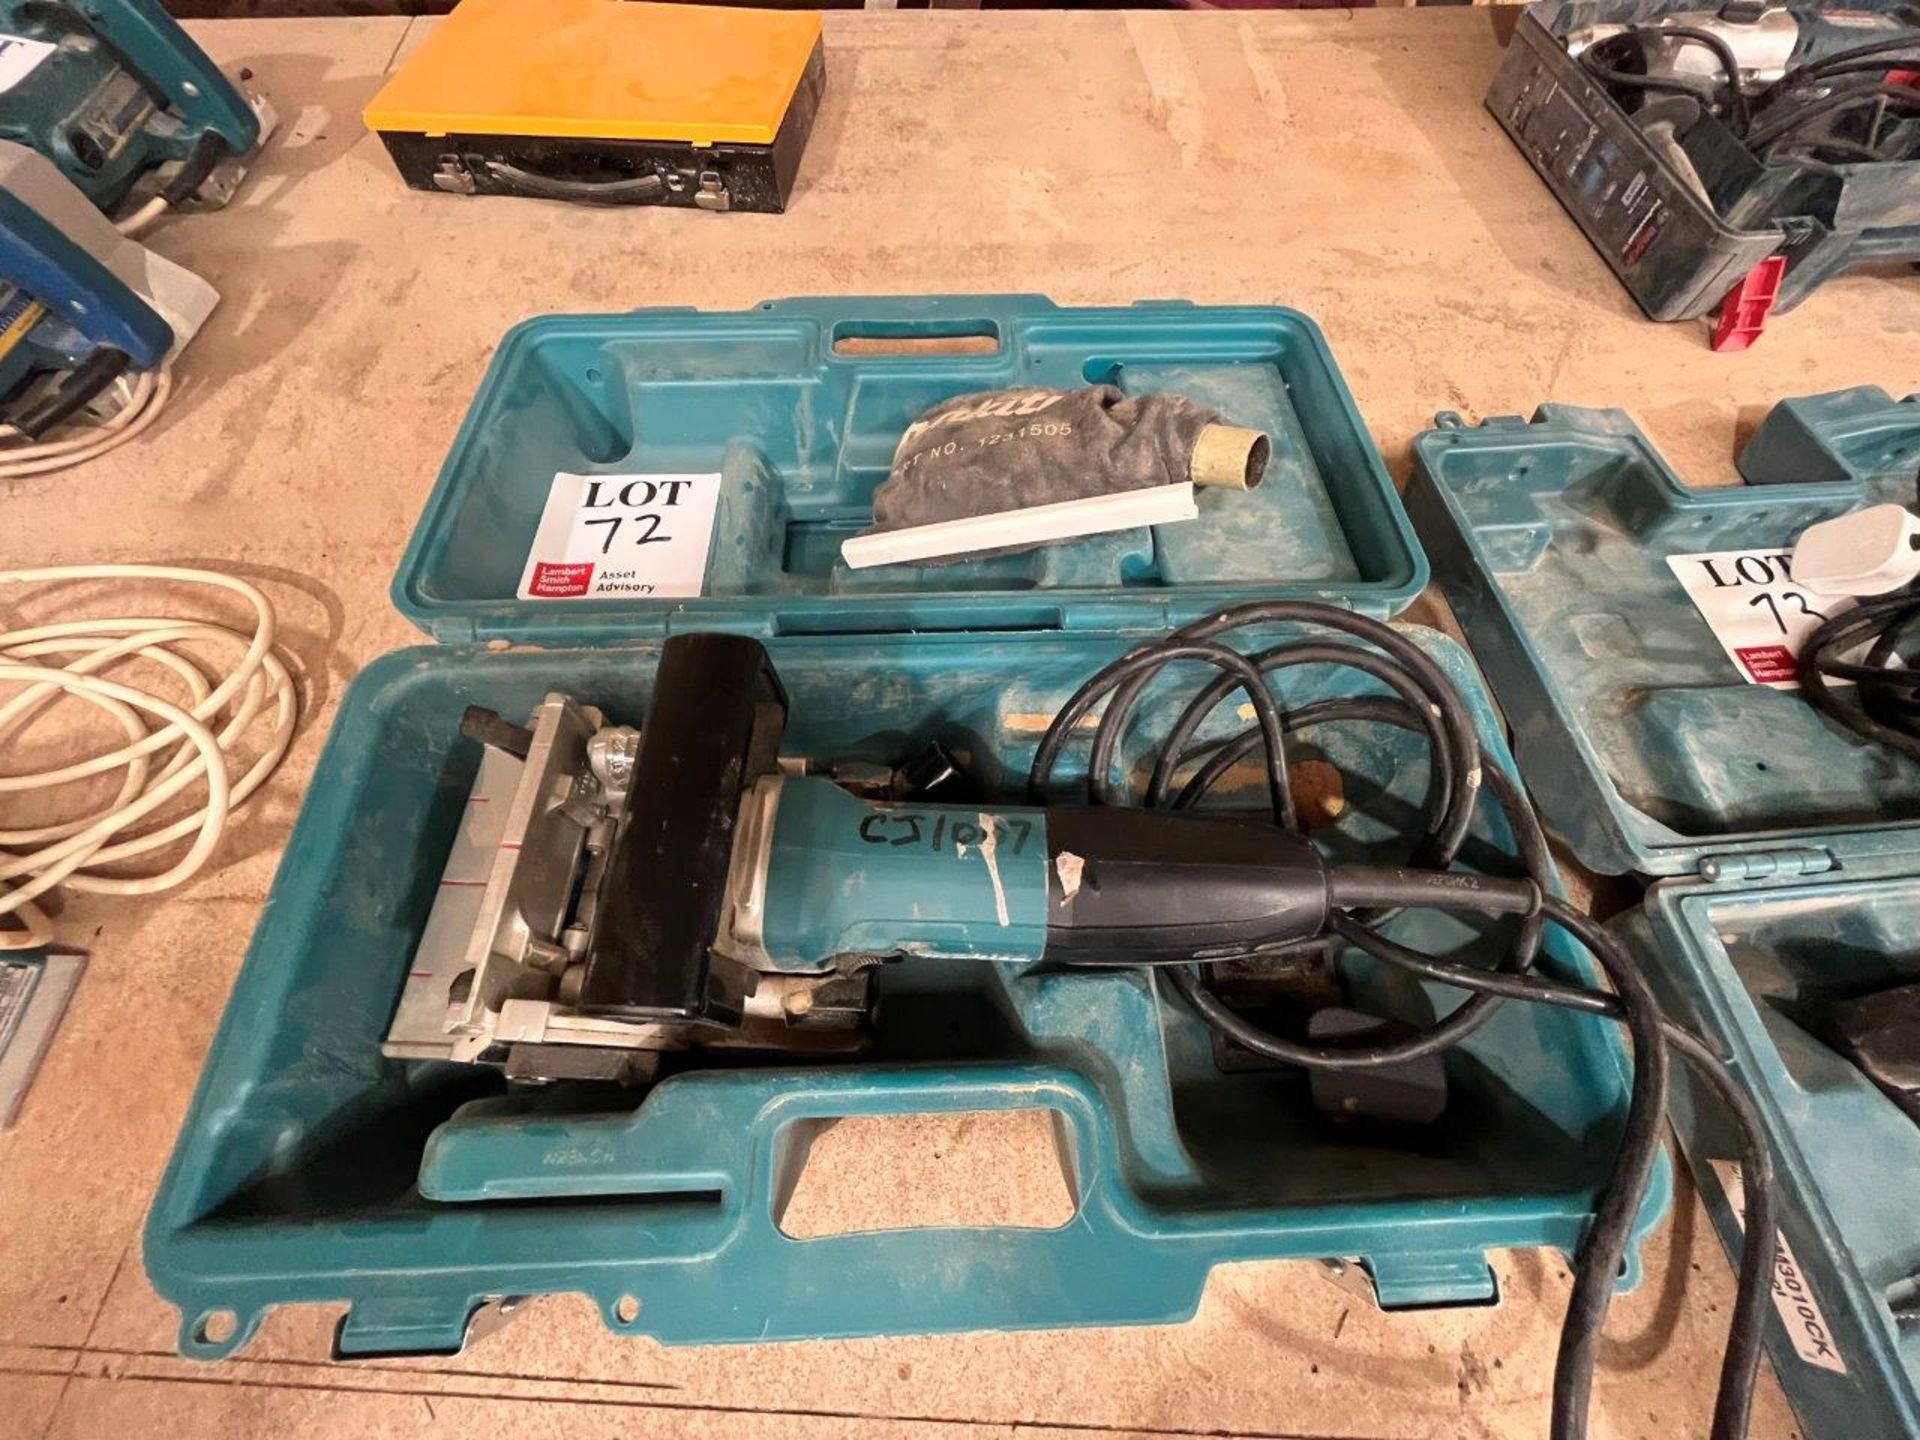 Makita PJ7000 buscuit jointer with carry case